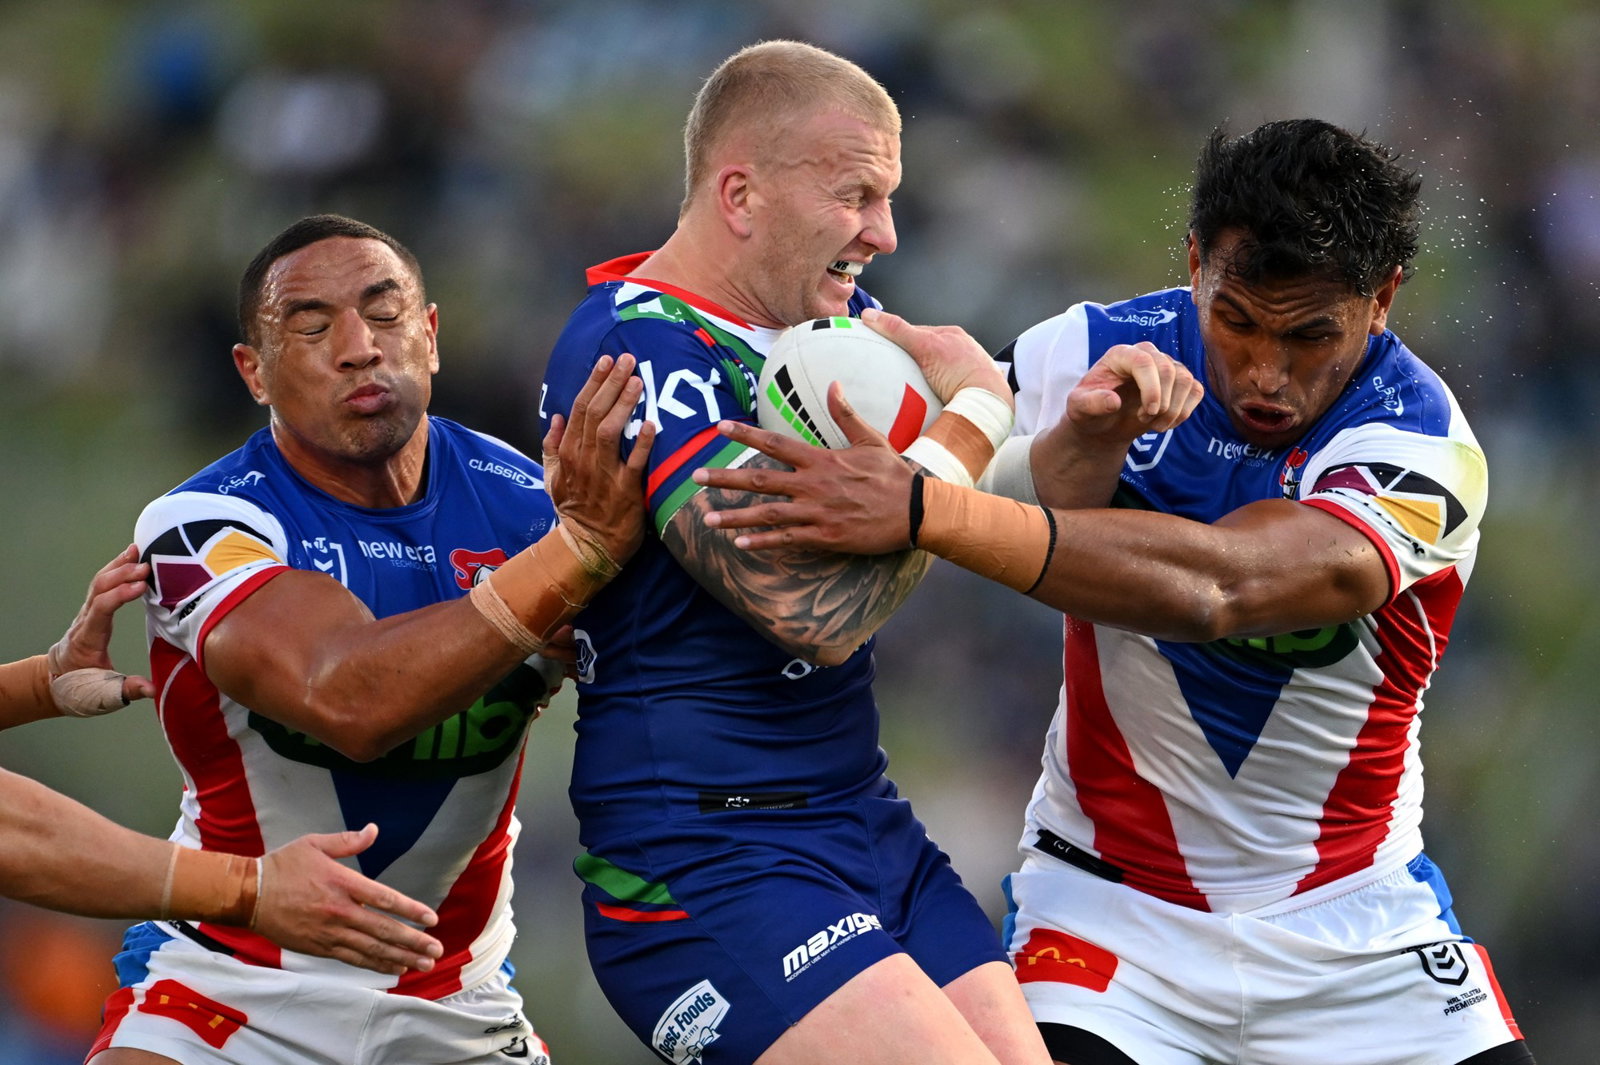 Mitchell Barnett runs into Newcastle Knights tacklers during an NRL game.